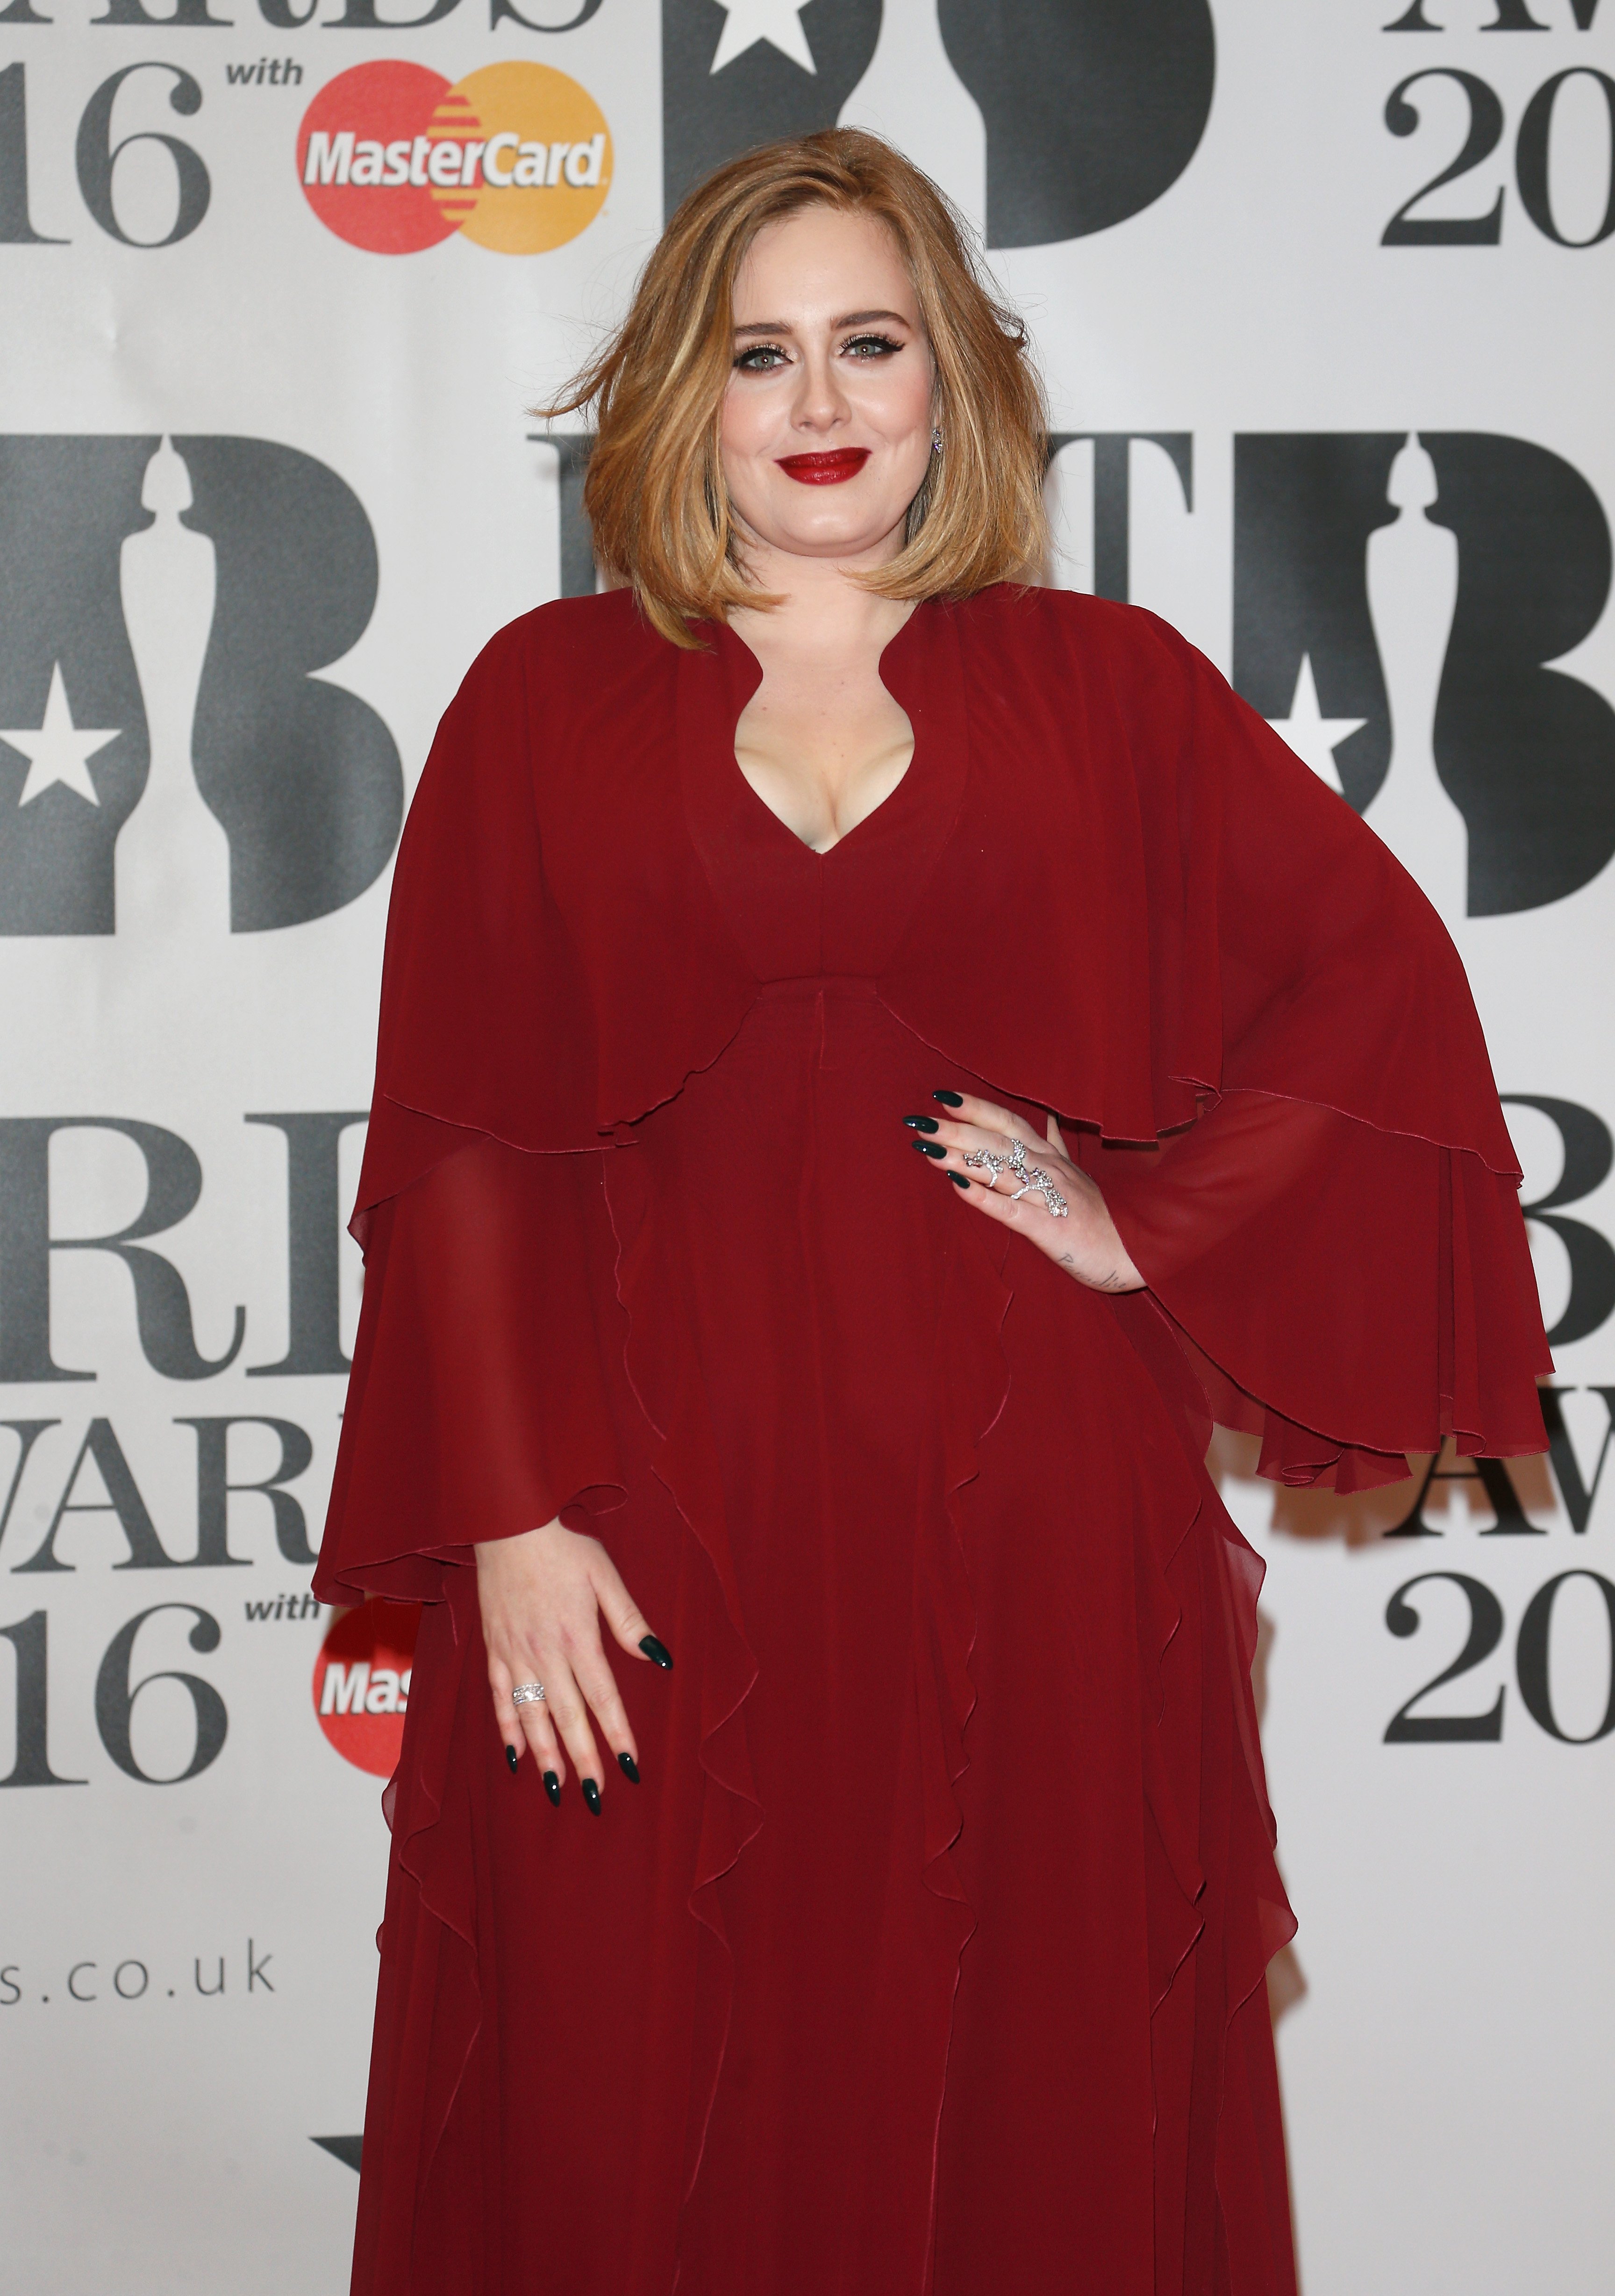 Adele attends the BRIT Awards on February 24, 2016, in London, England. | Source: Getty Images.